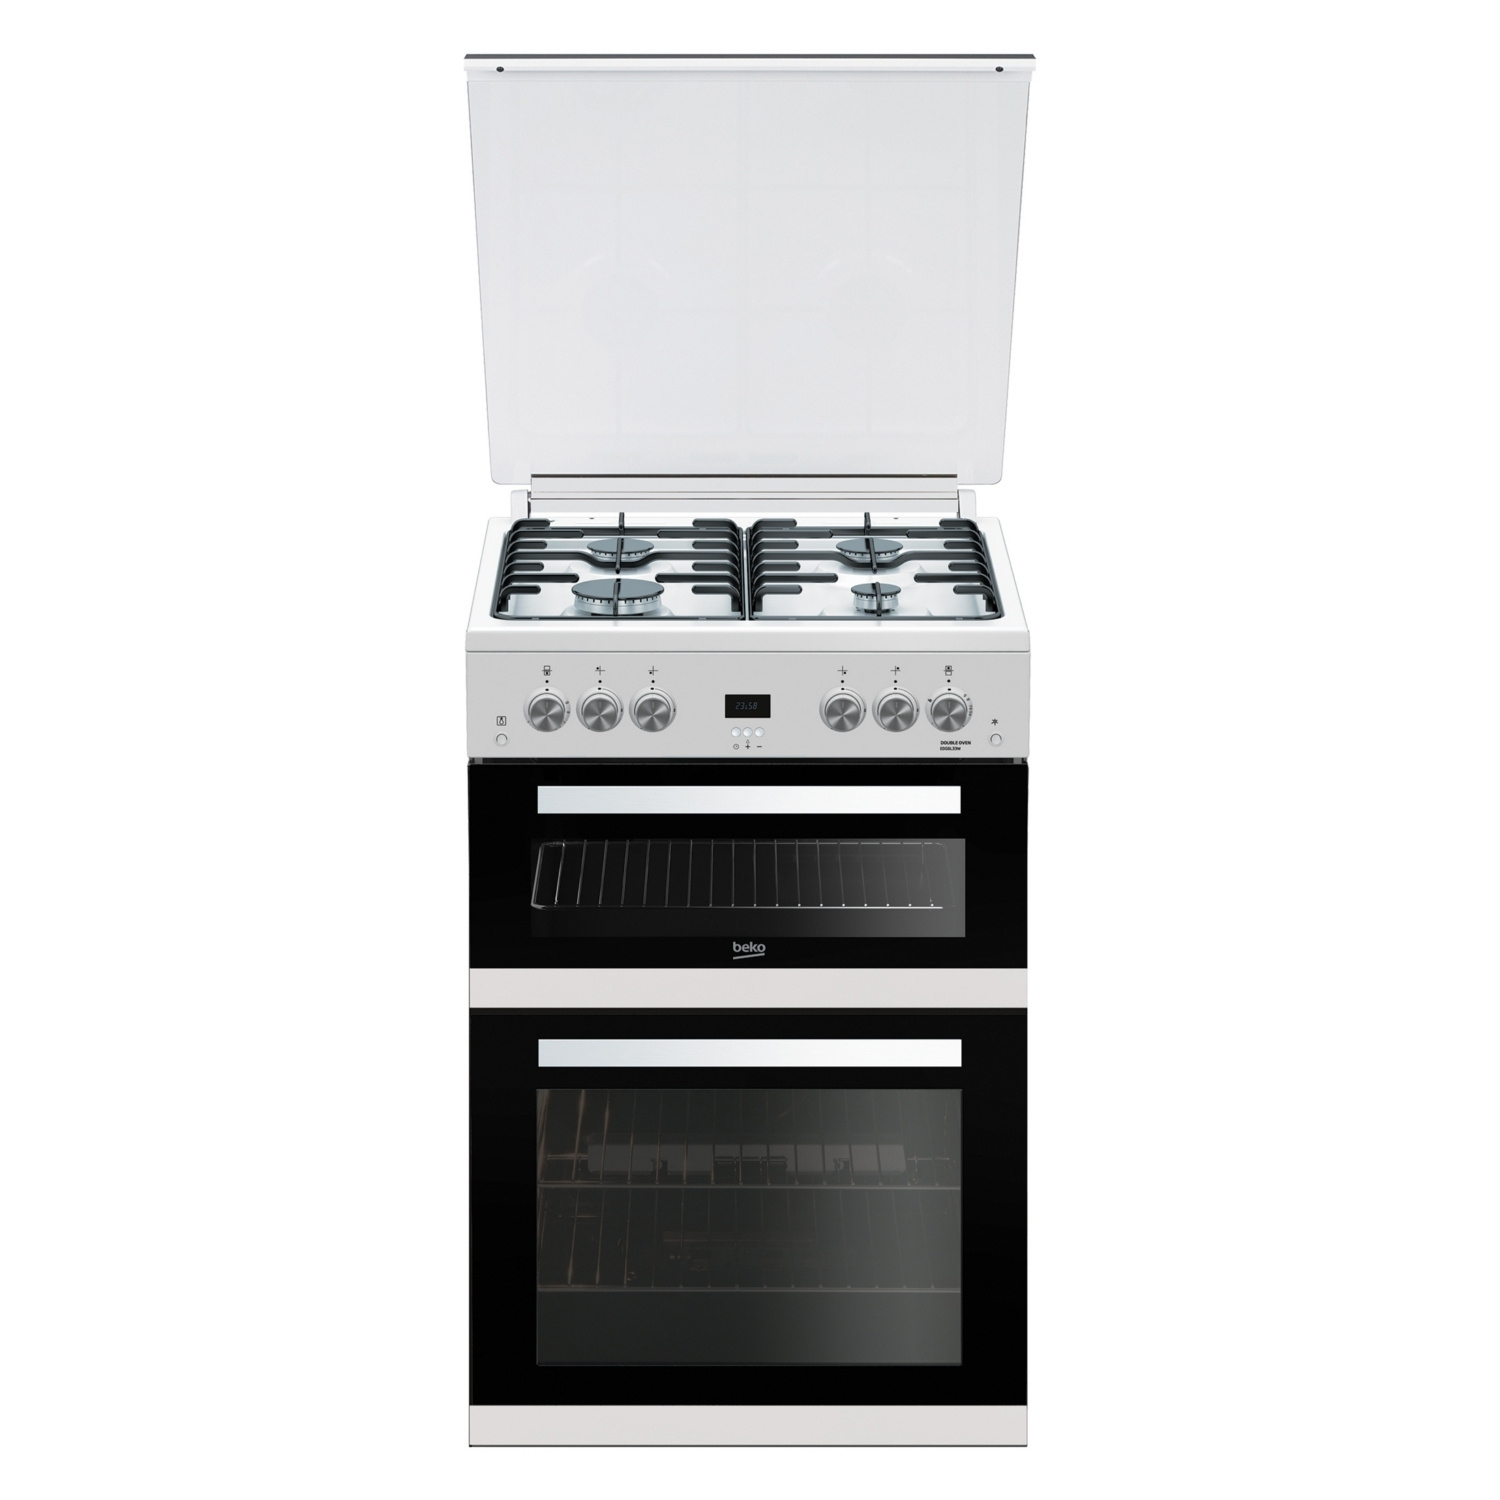 Beko EDG6L33W 60cm Gas Double Oven with Glass Lid - White - 7